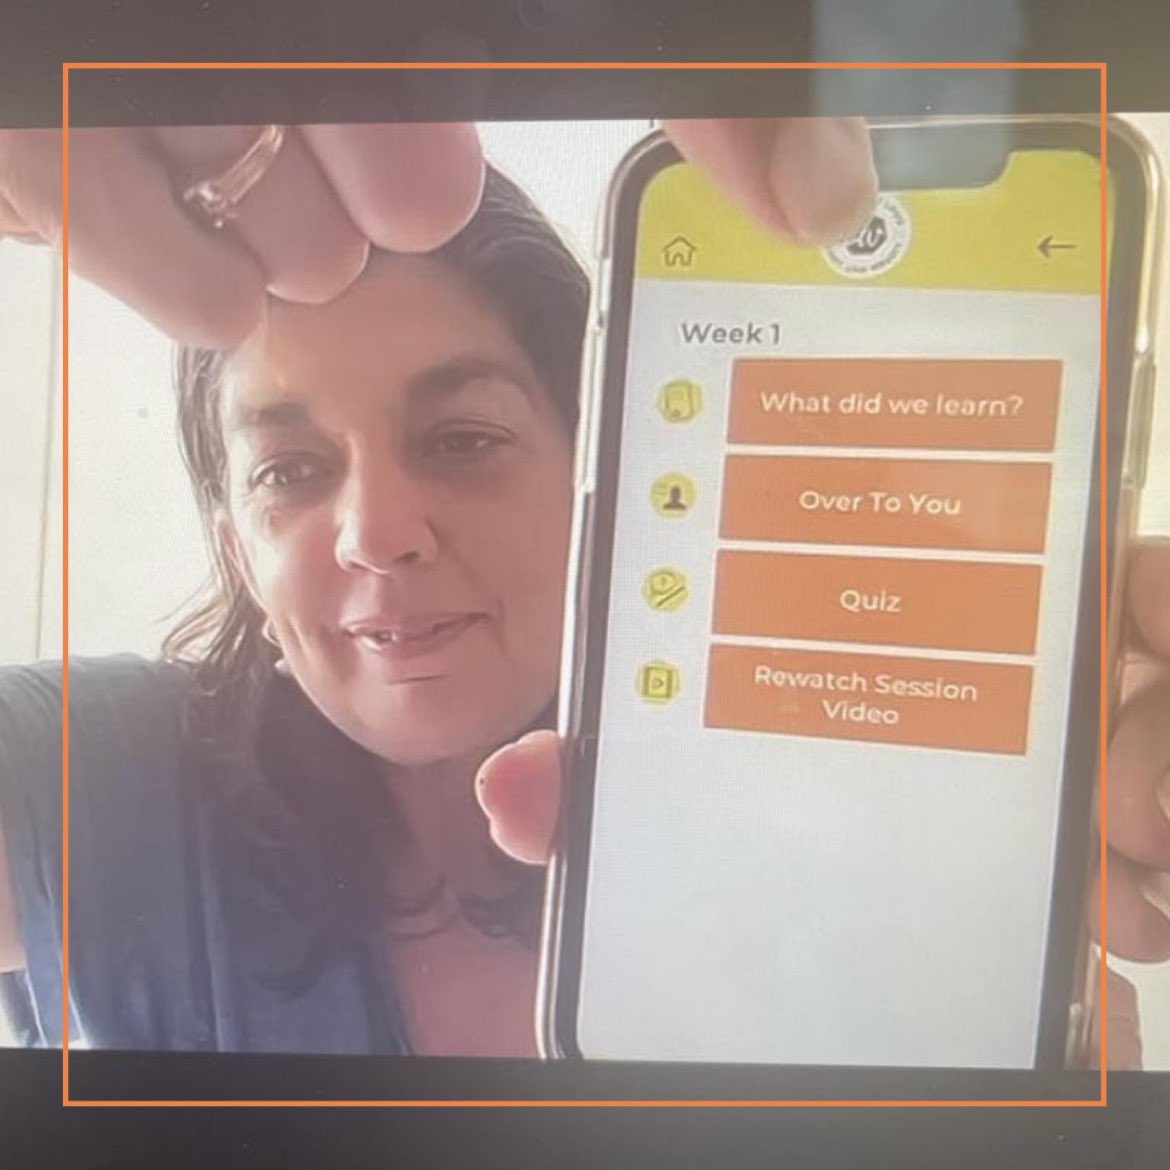 Excited to be trialling the #LivingWords app with our second #ListenOutLoud course for carers, starting tomorrow 📲 🧡

#OnlineCourse #LivingWords #Innovation #Methodology #LivingExperience #SmallCharity #Grassroots #Dementia #Carers